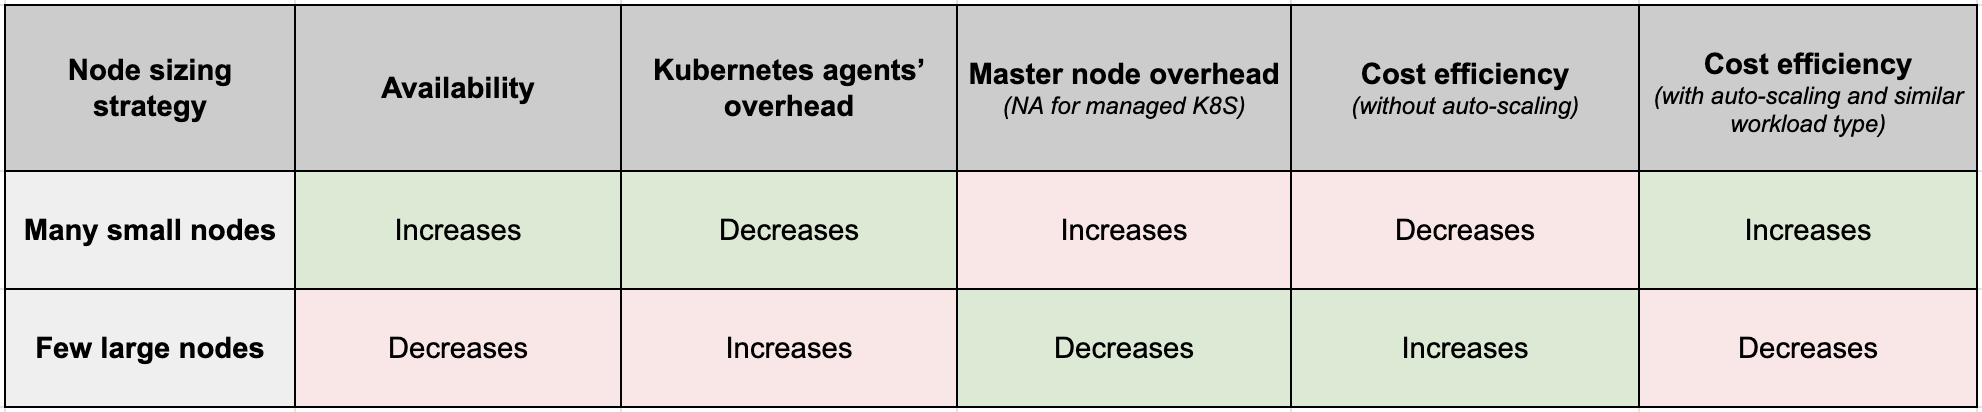 Node sizing and cost efficiency with autoscaling